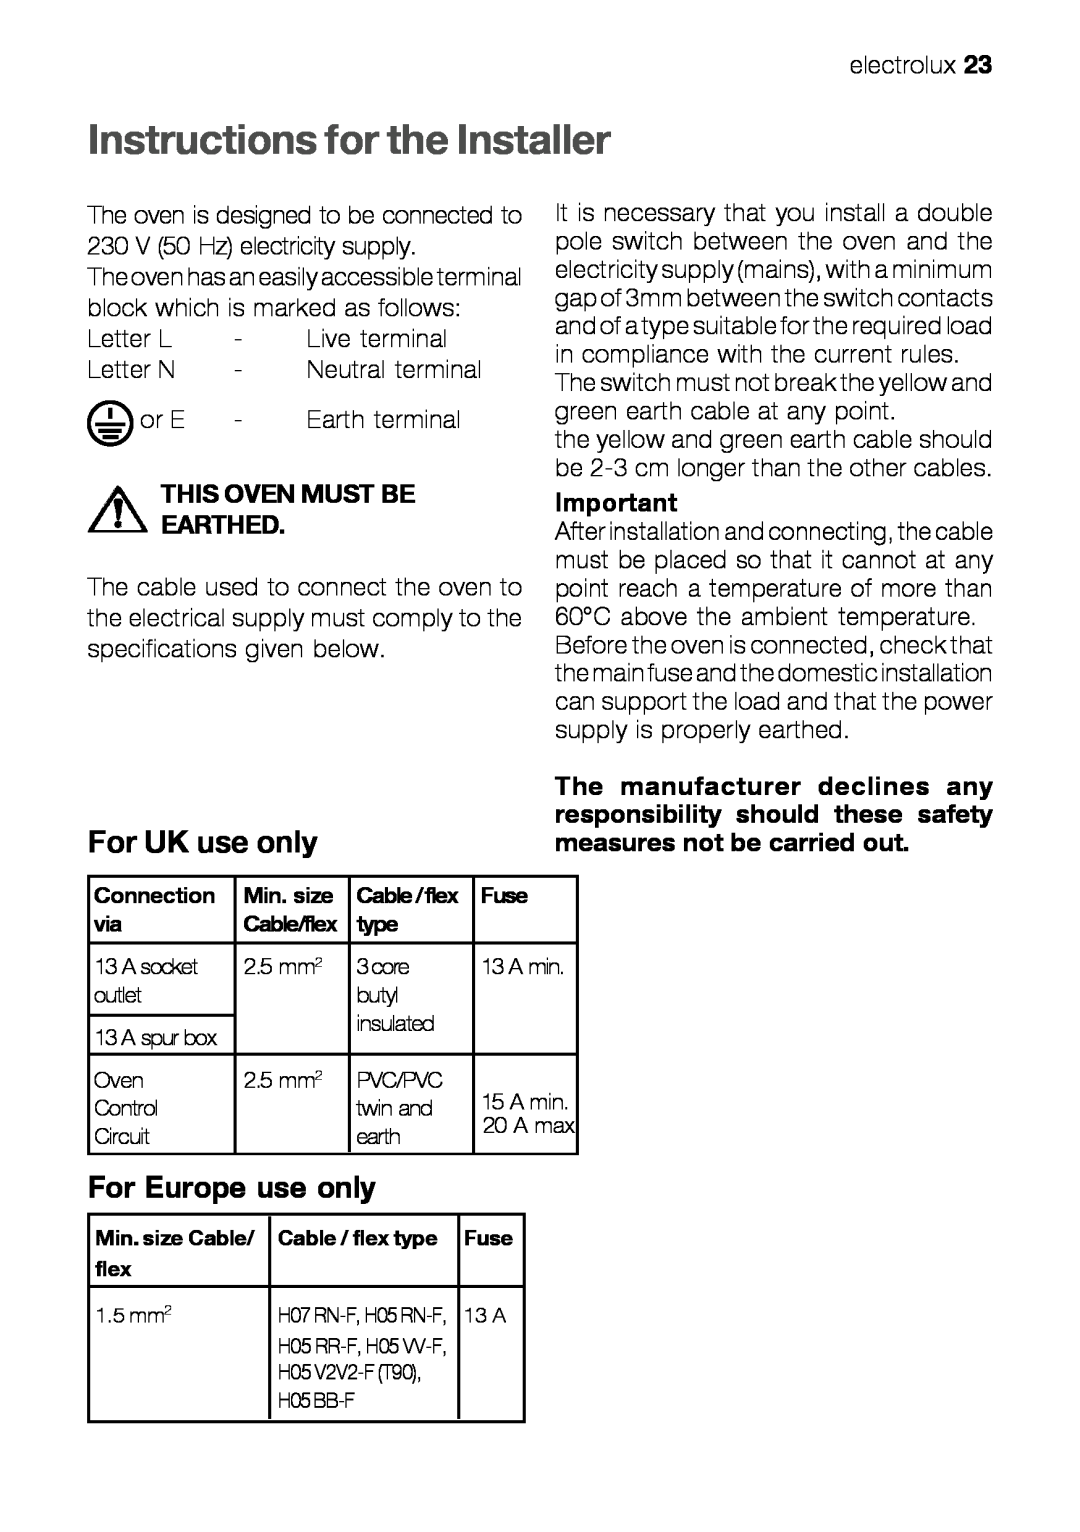 Electrolux EOB 21001 Instructions for the Installer, For UK use only, For Europe use only, This Oven Must Be Earthed 